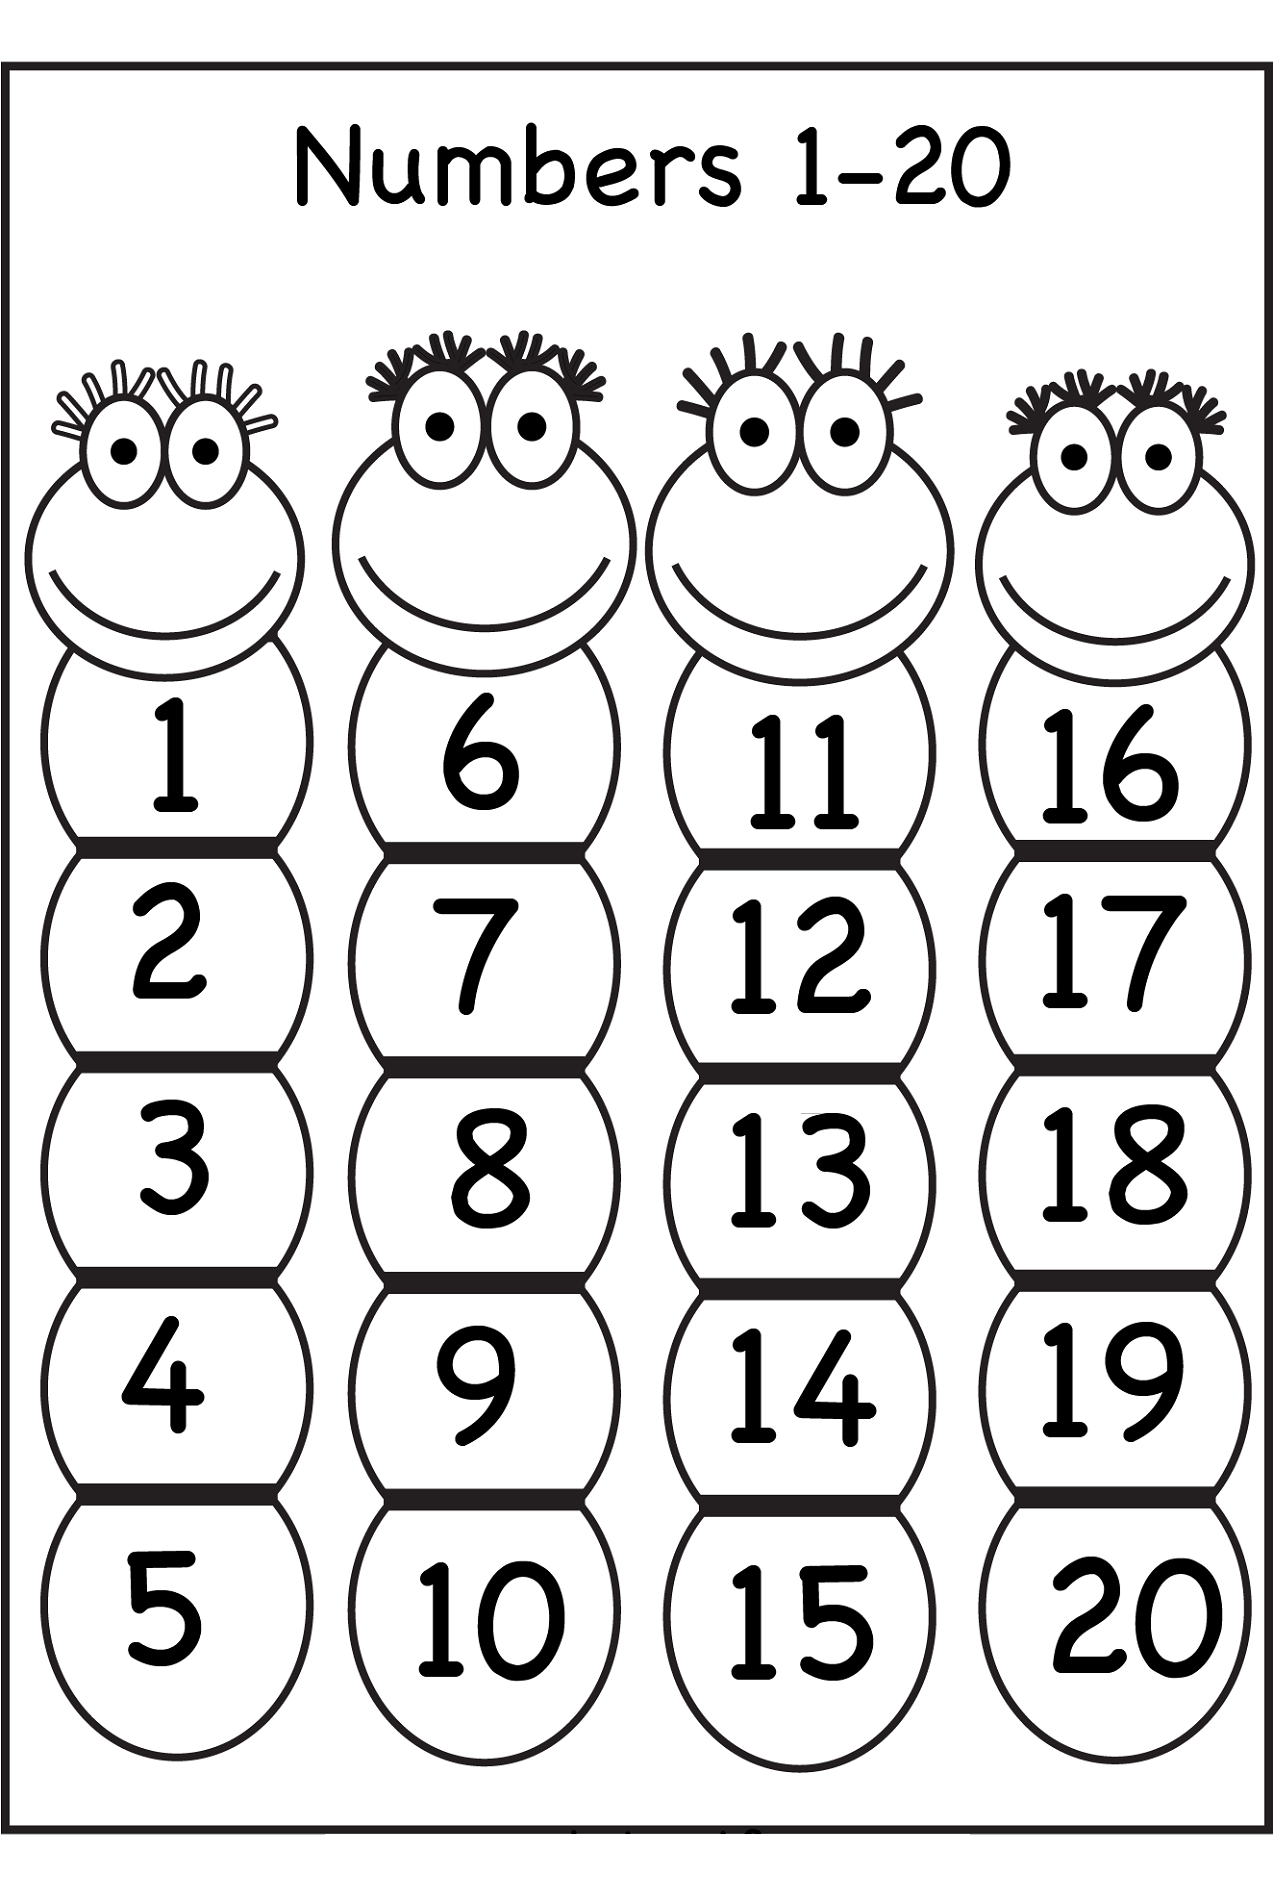 Counting To 20 Worksheet